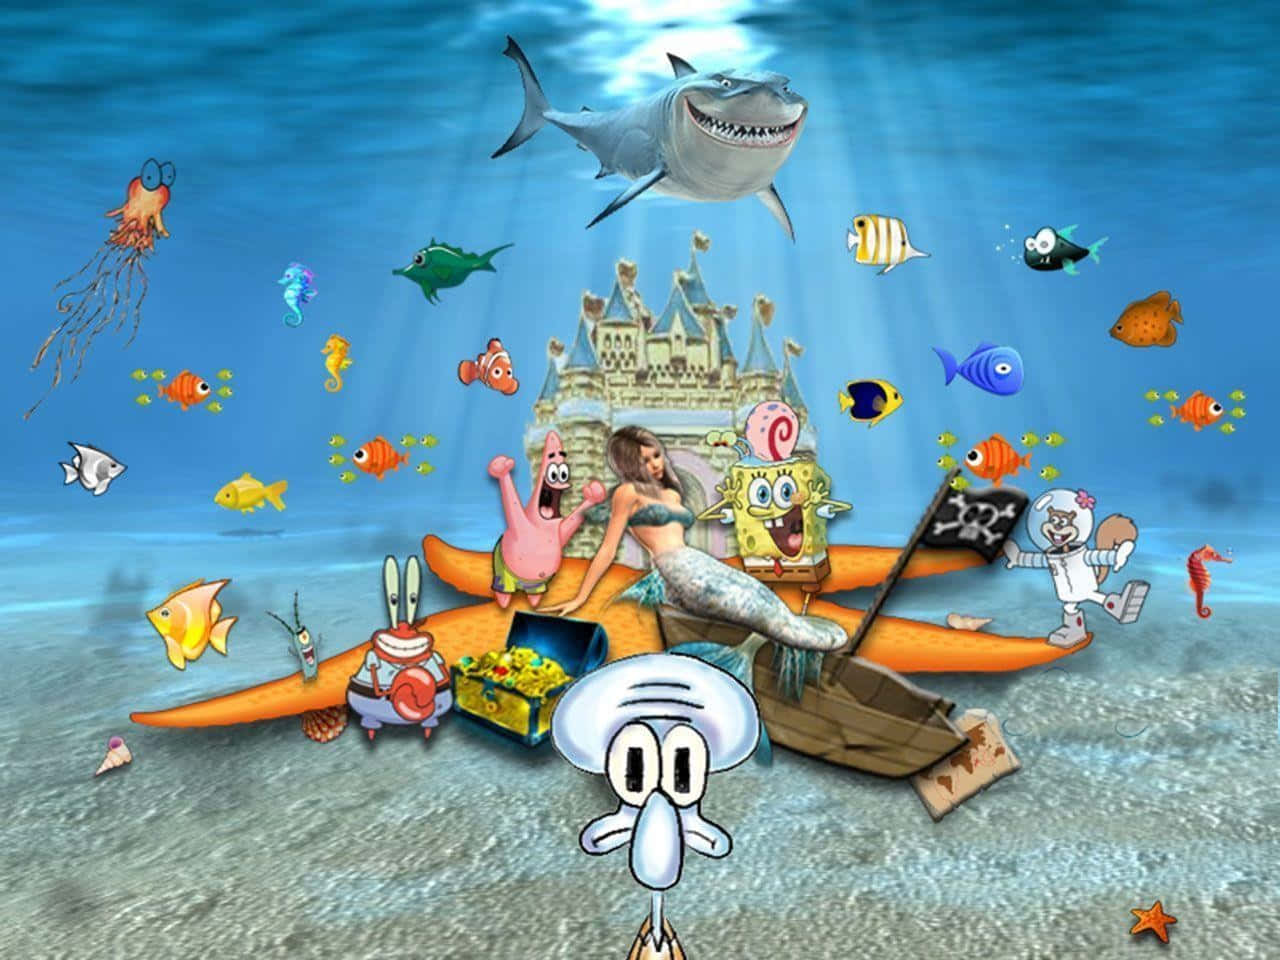 Don't you wish you were living life under the sea with Spongebob Squarepants?